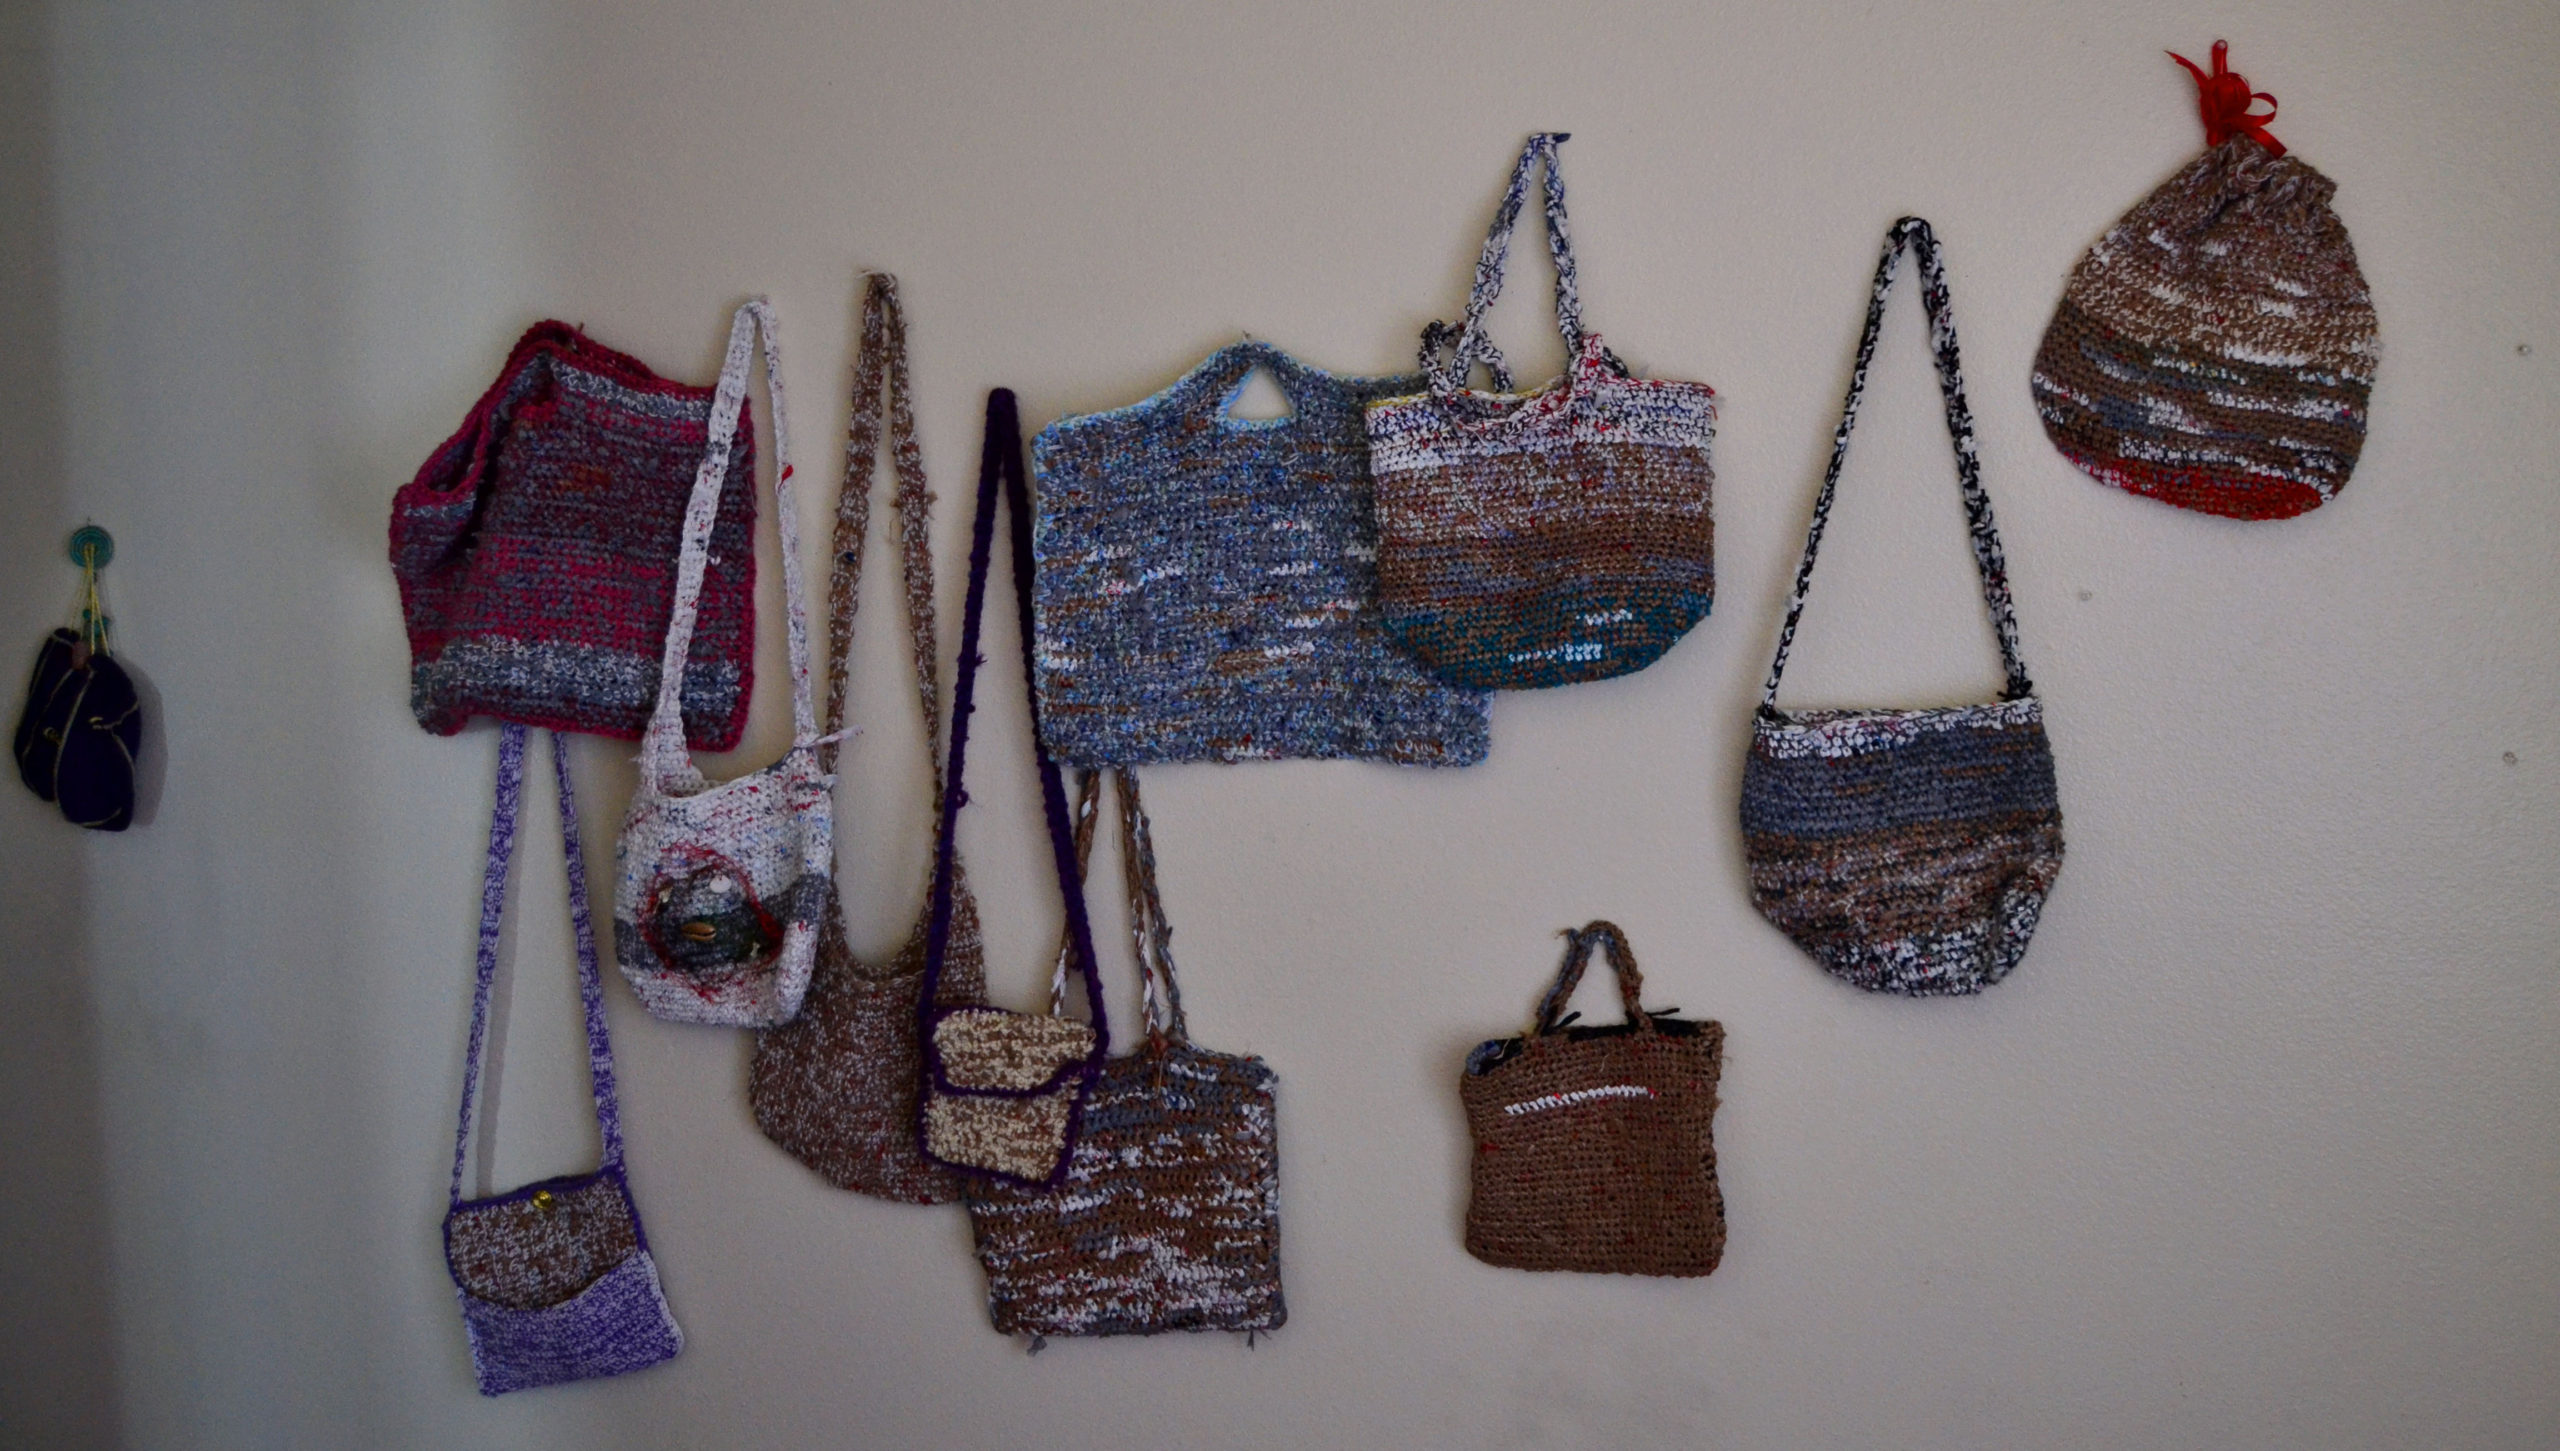 a variety of hand-crocheted bags and purses made from recycled plastic shopping bags